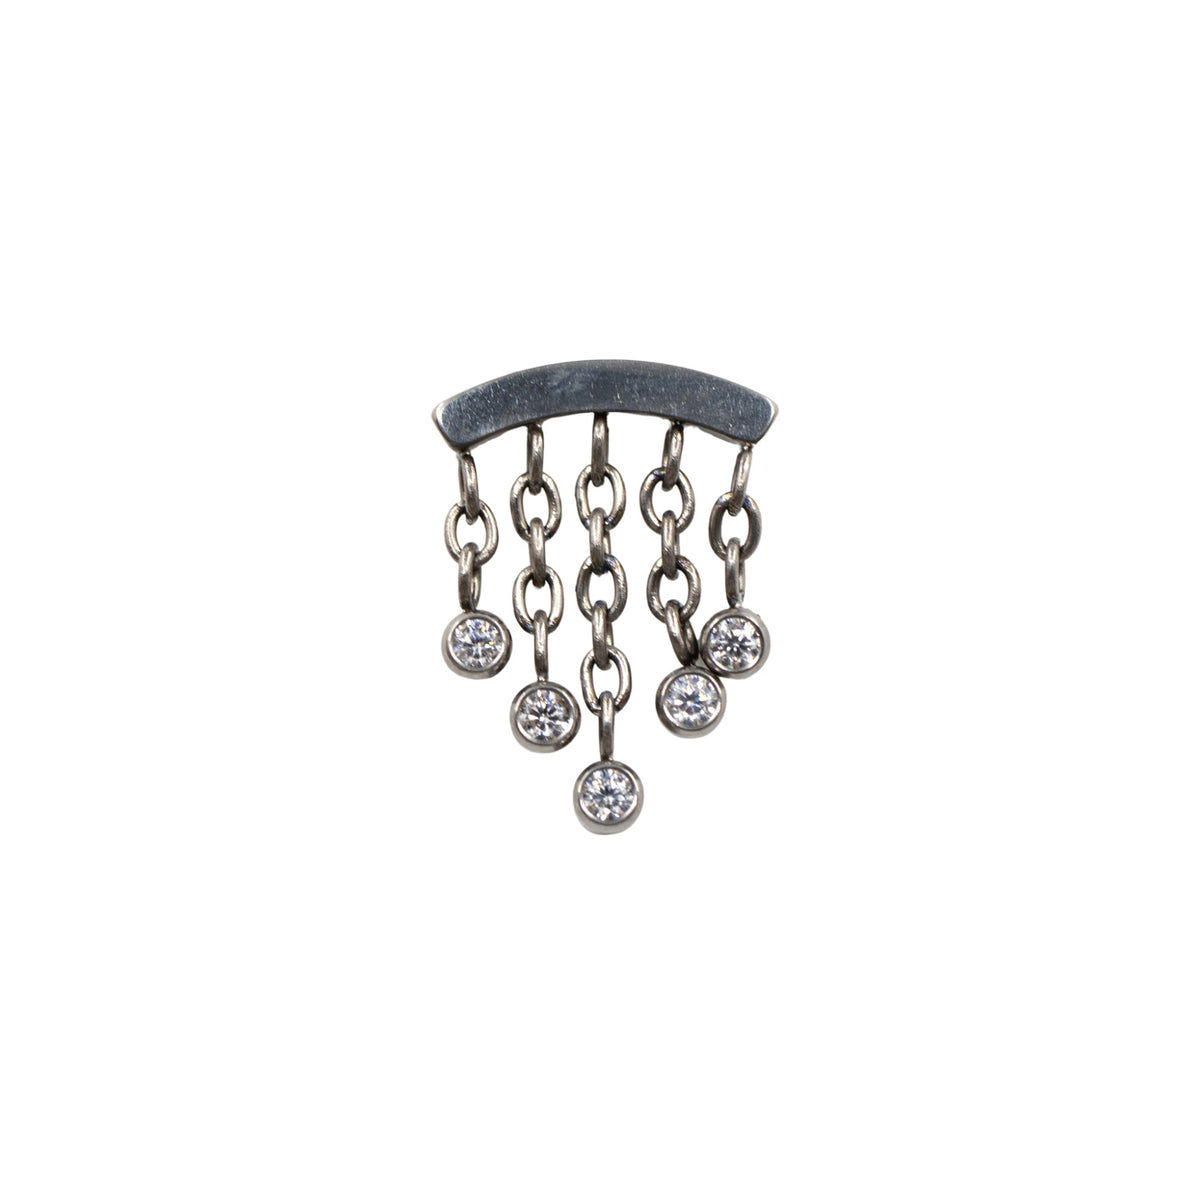 Silver Threadless Tops Crystal Chandelier Floating Helix Top The Curated Lobe